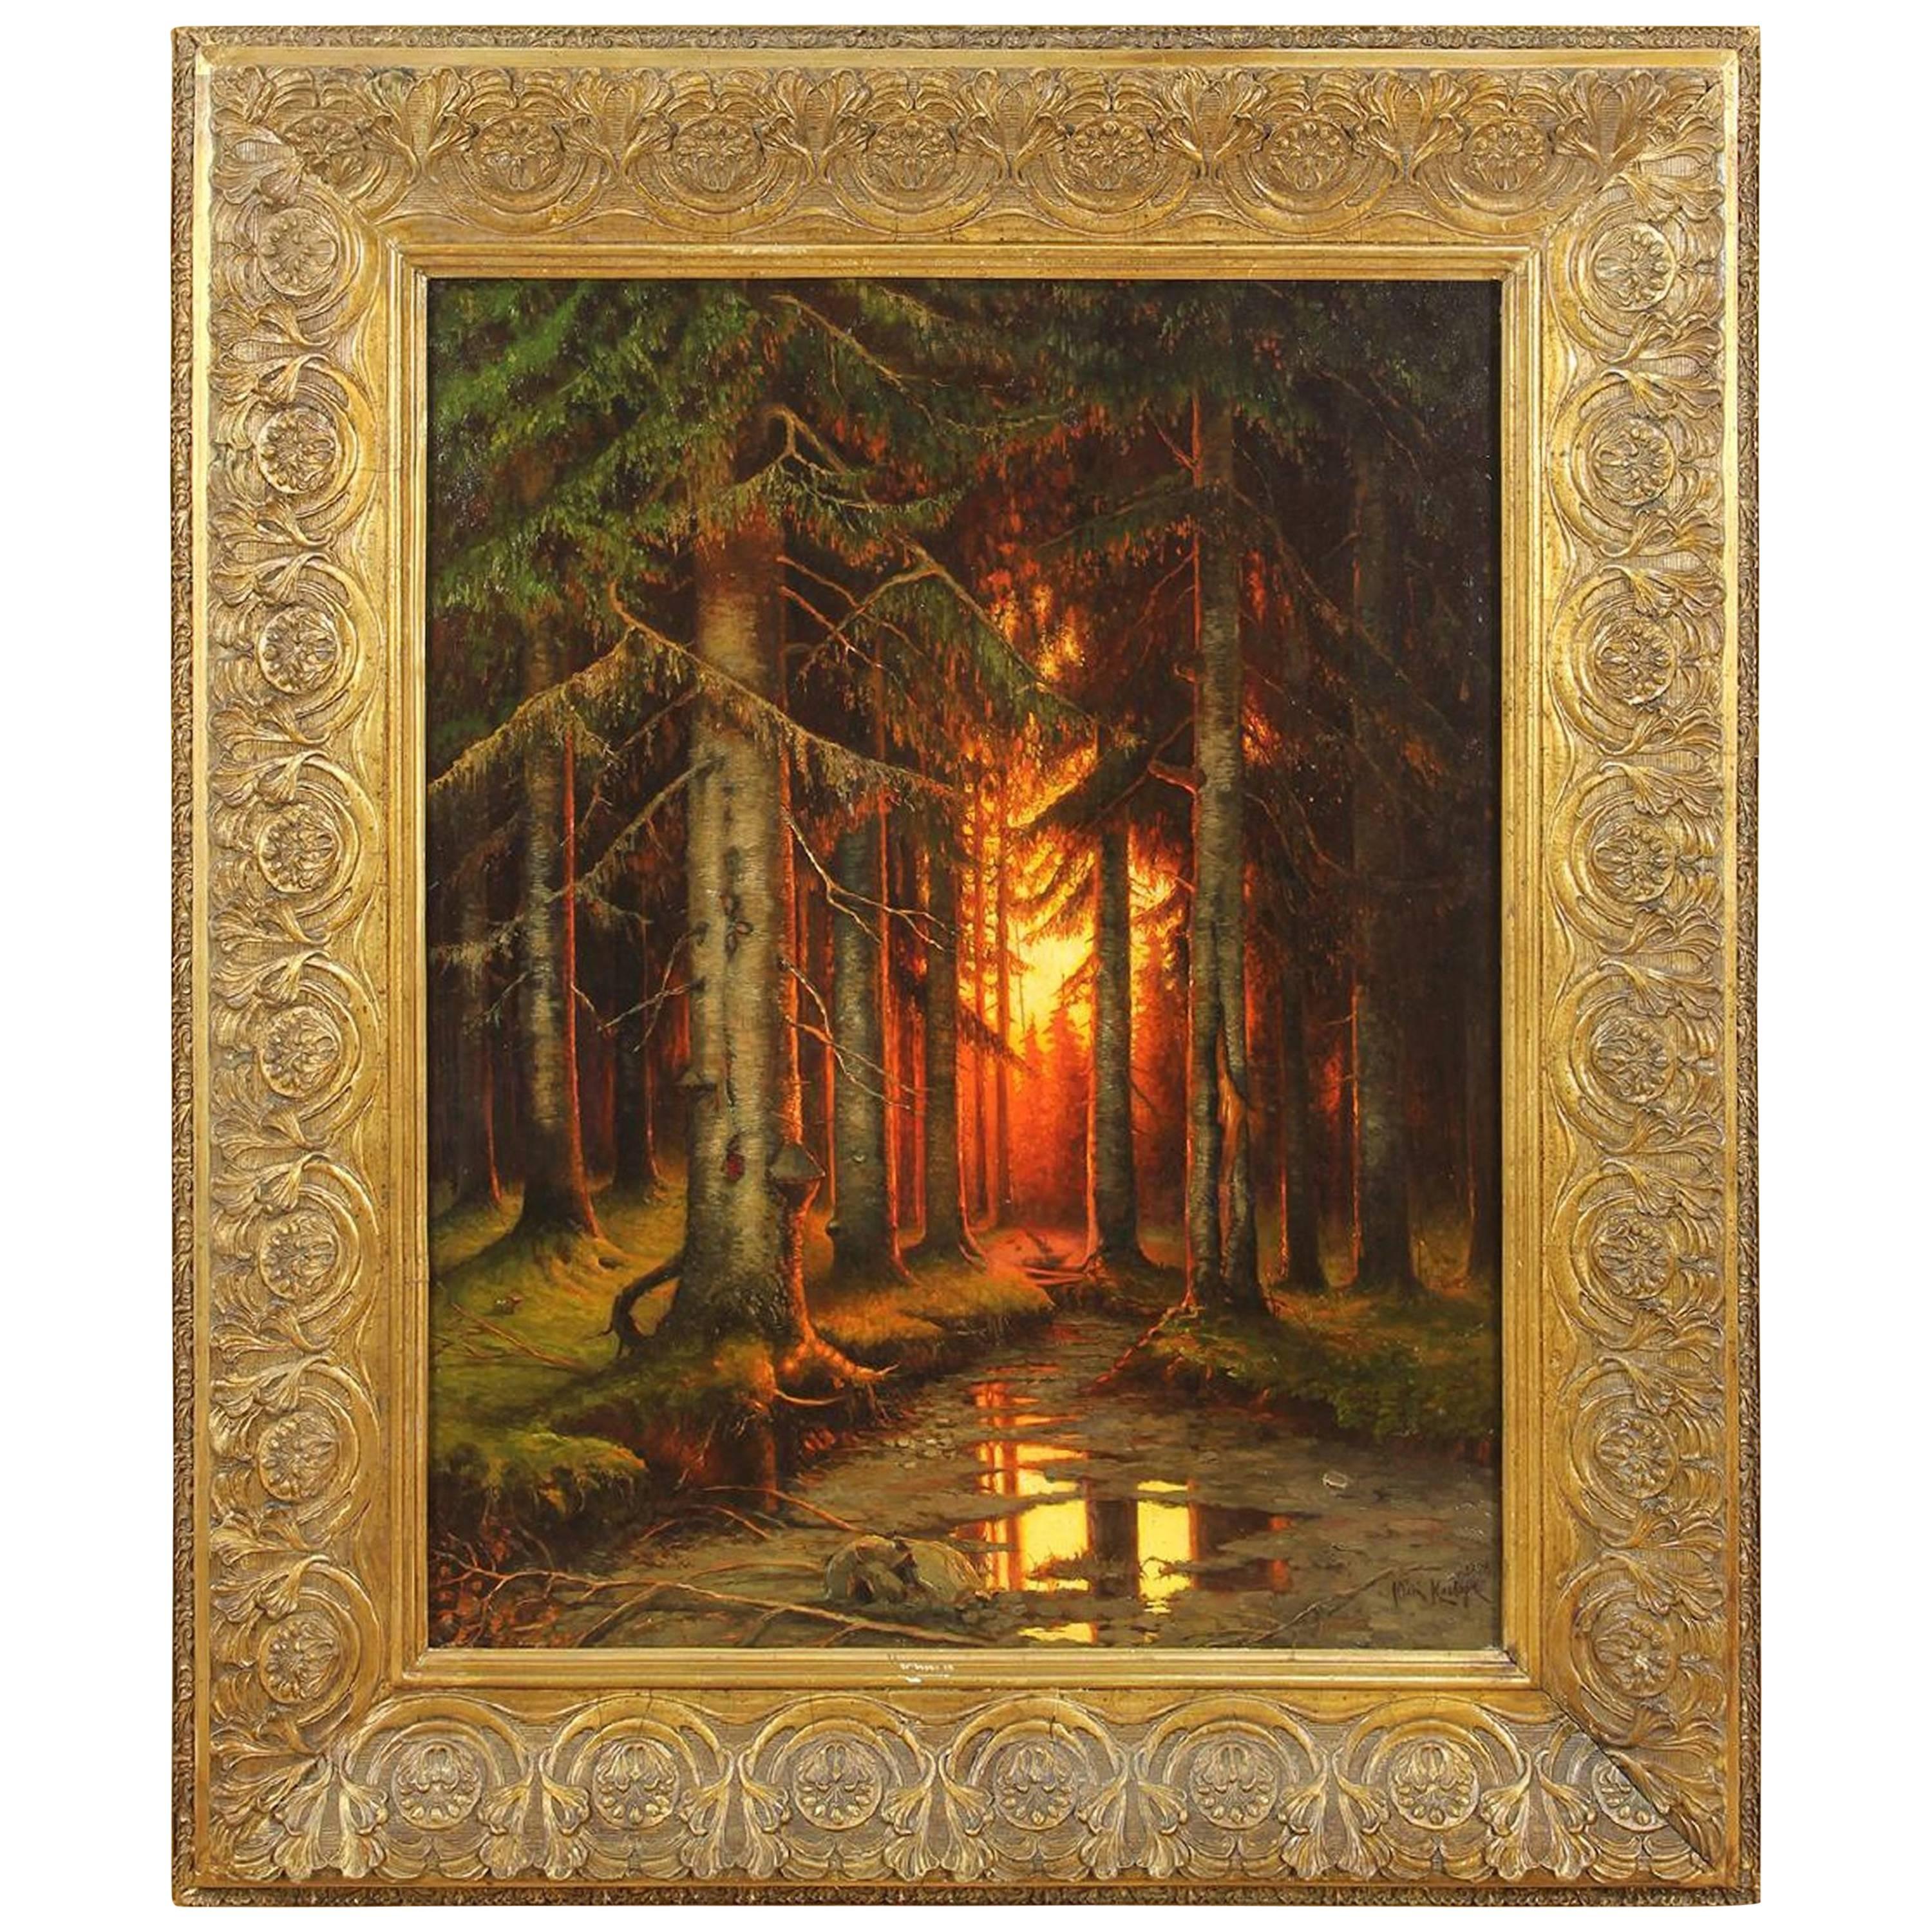 "Sunrise in the Forest" Painting by Yuliy Yulevich Julius Klever, 1886